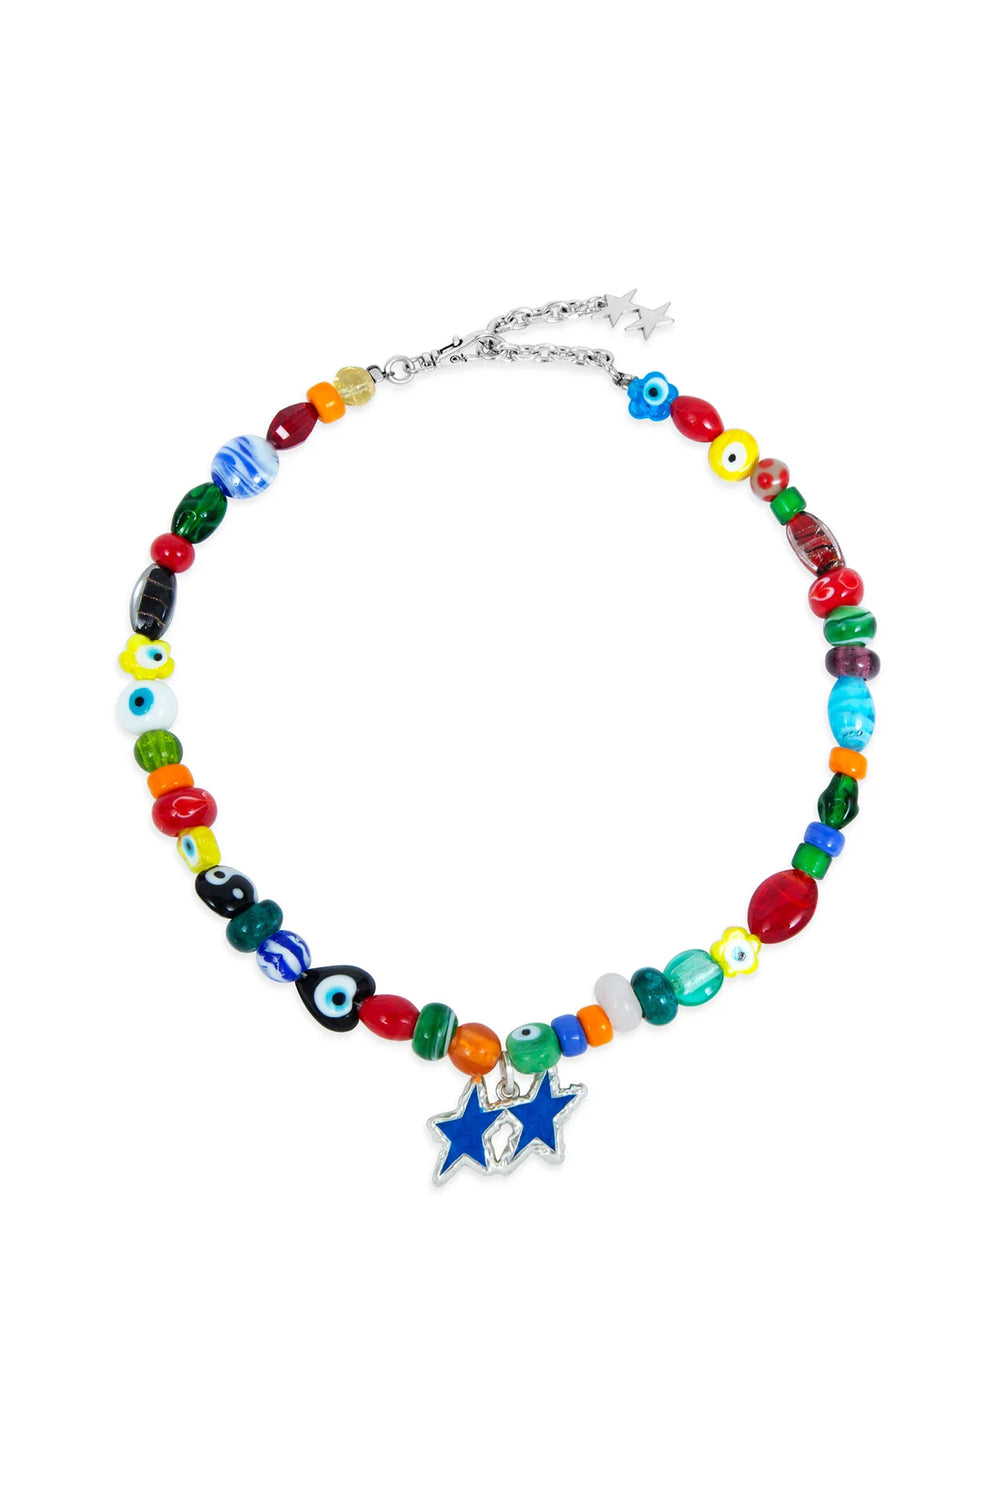 Pukas-surf-shop-Two-jeys-Blue-Melted-Stars